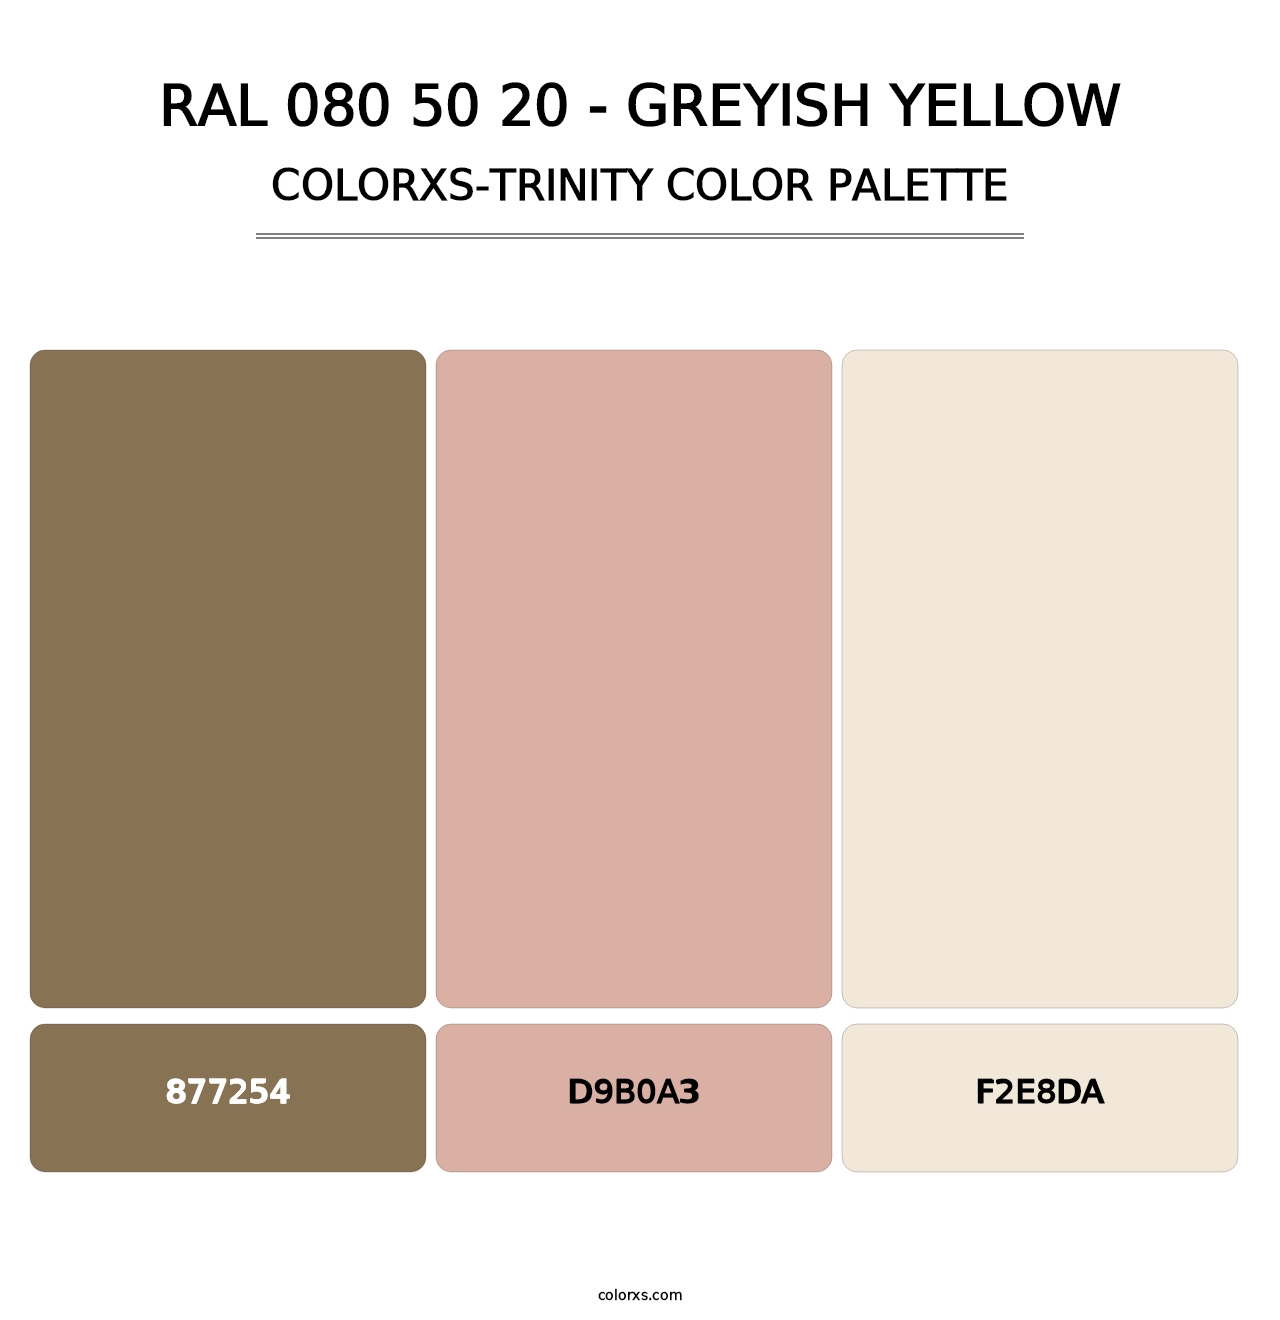 RAL 080 50 20 - Greyish Yellow - Colorxs Trinity Palette